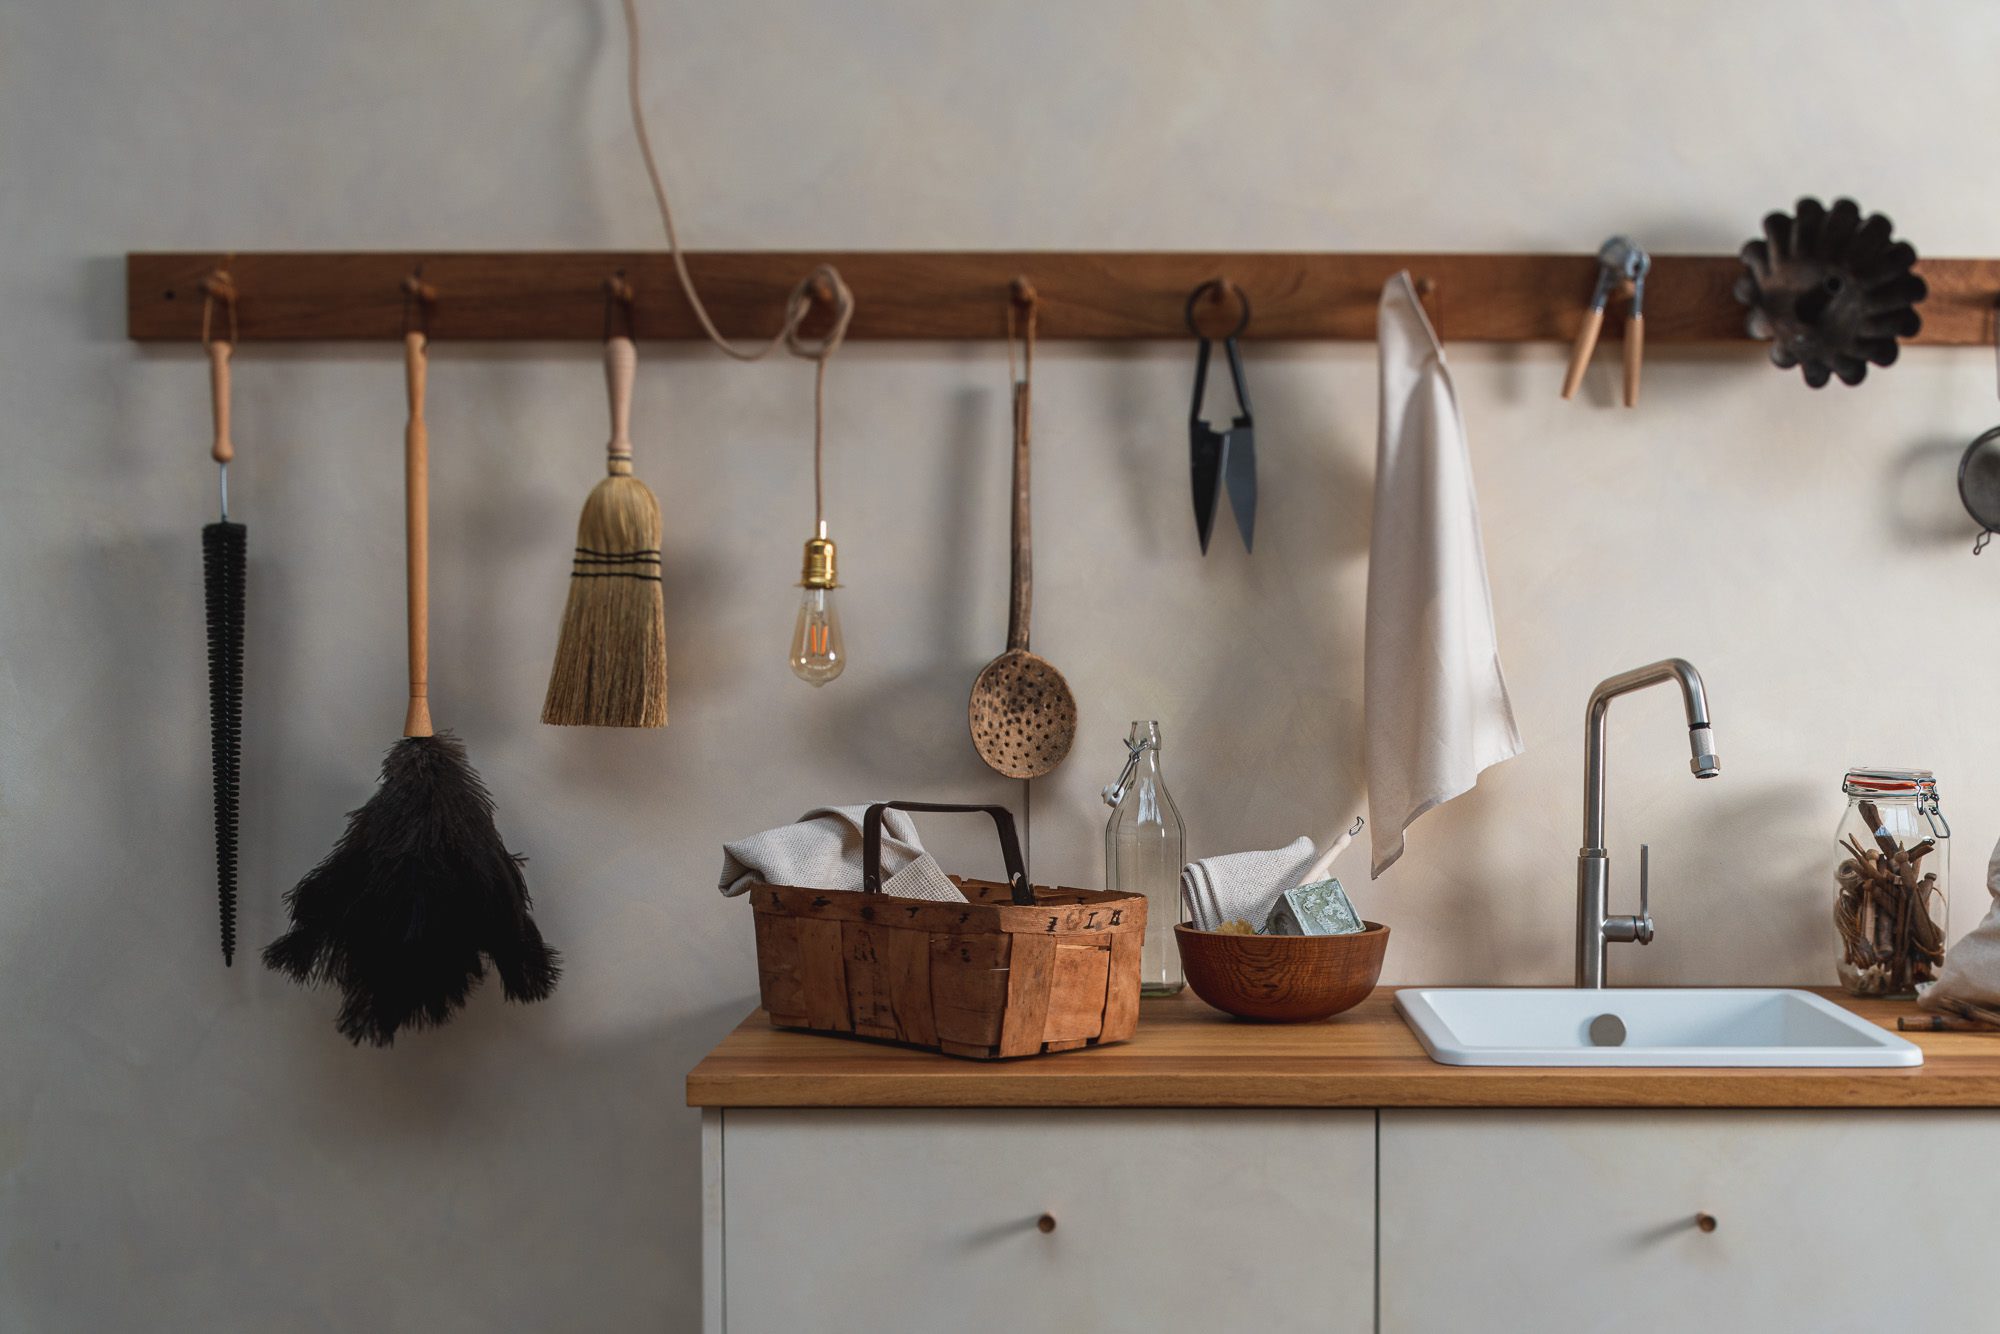 A detailed view of a bathroom basin with an array of cleaning brushes and other elements neatly arranged along it, skillfully photographed by Brett Charles for interior architecture photography in the UK.